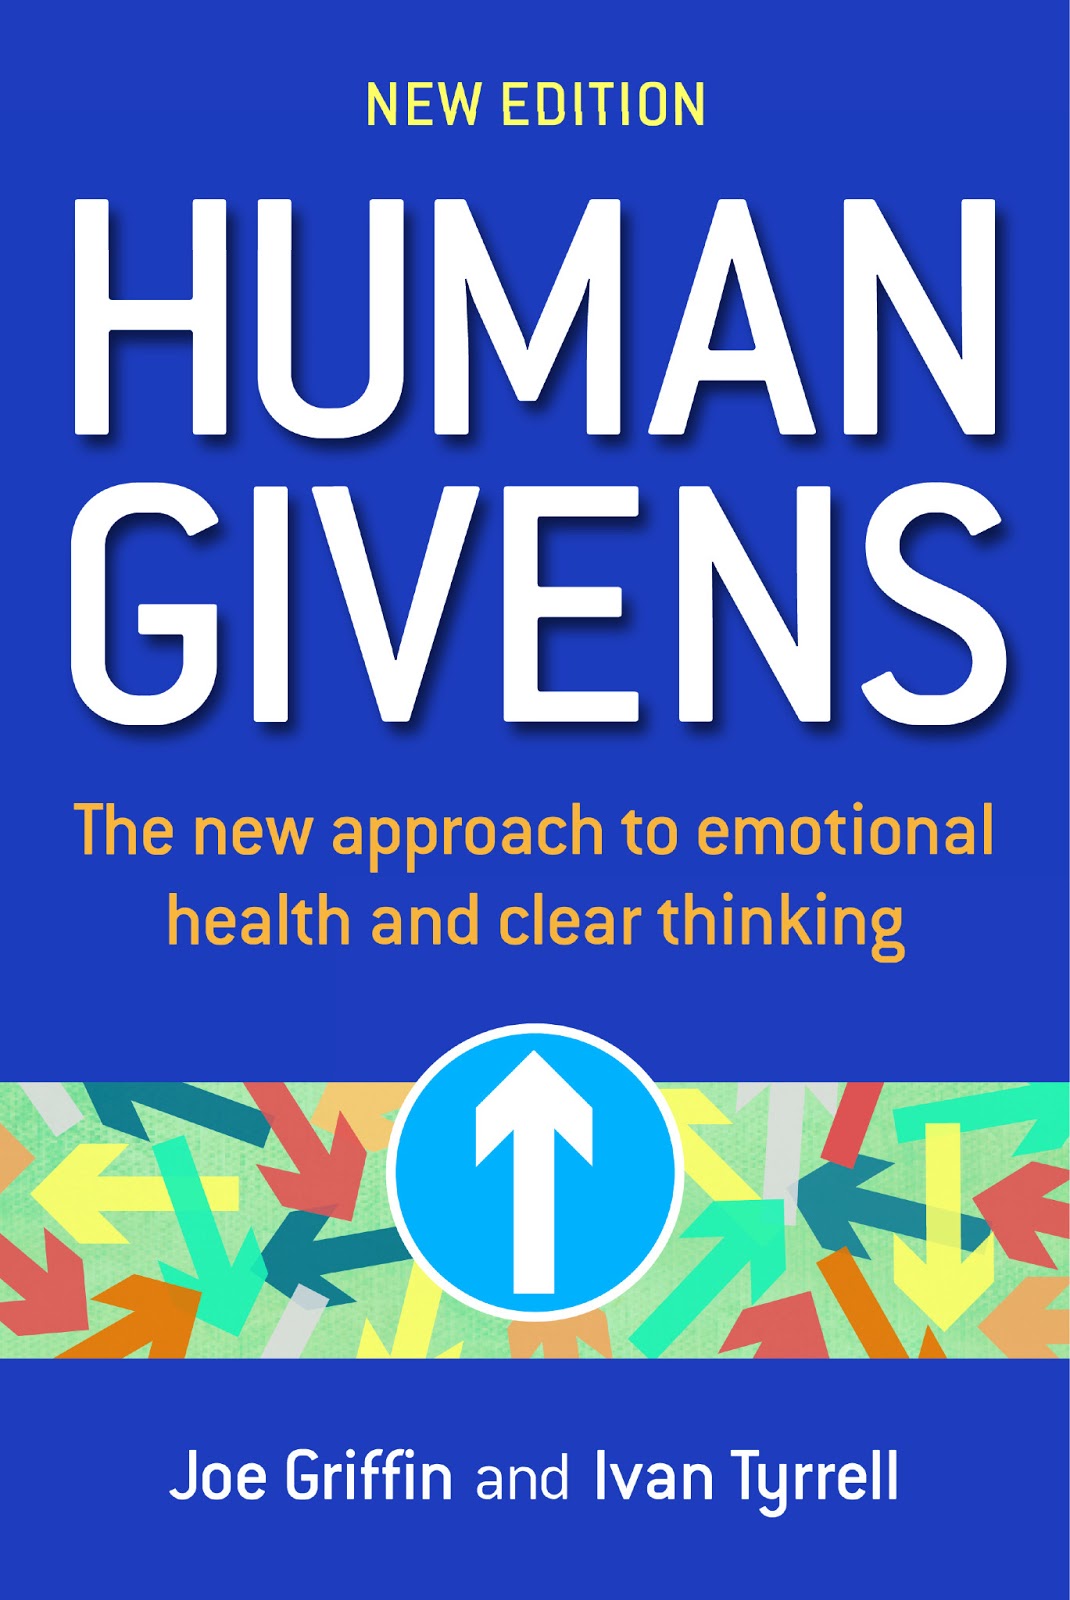 http://www.humangivens.com/publications/human-givens-book.html